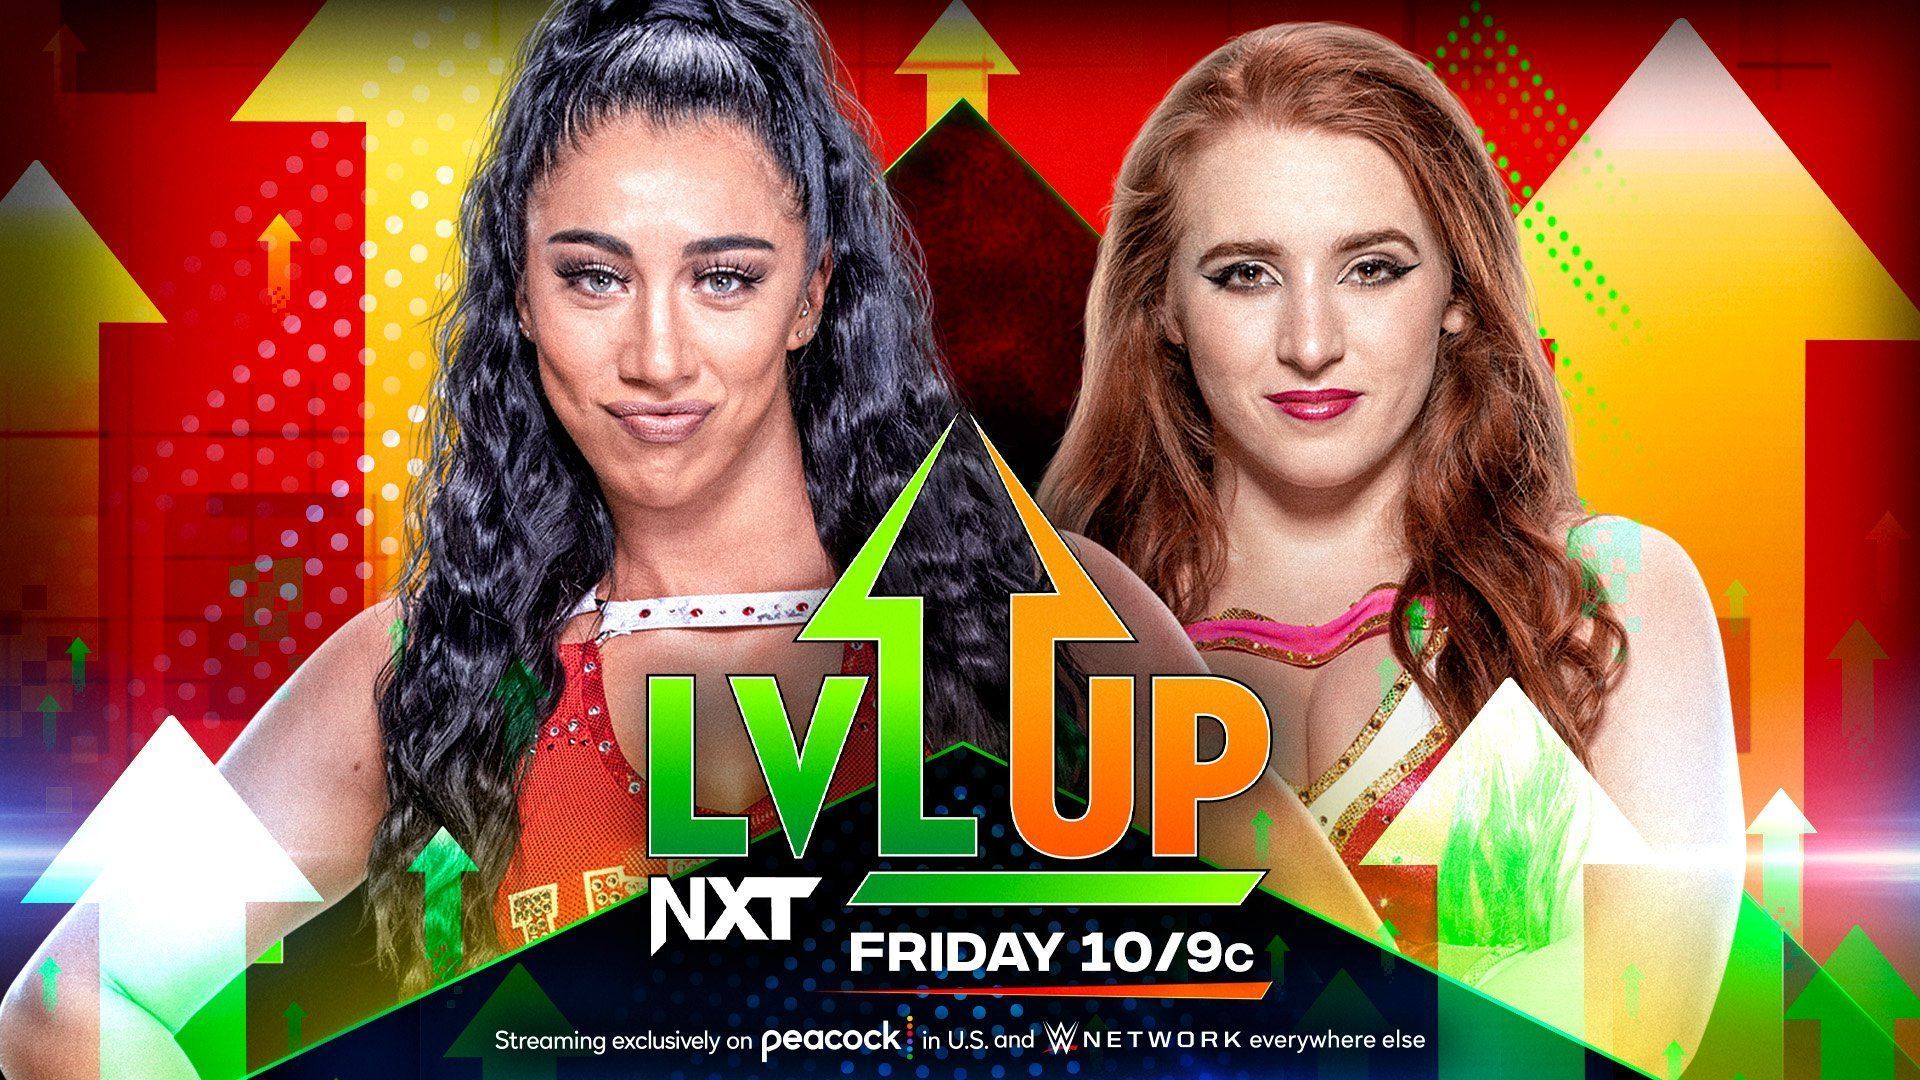 Indi Hartwell versus Sloane Jacobs will be in action on a new episode of NXT Level Up